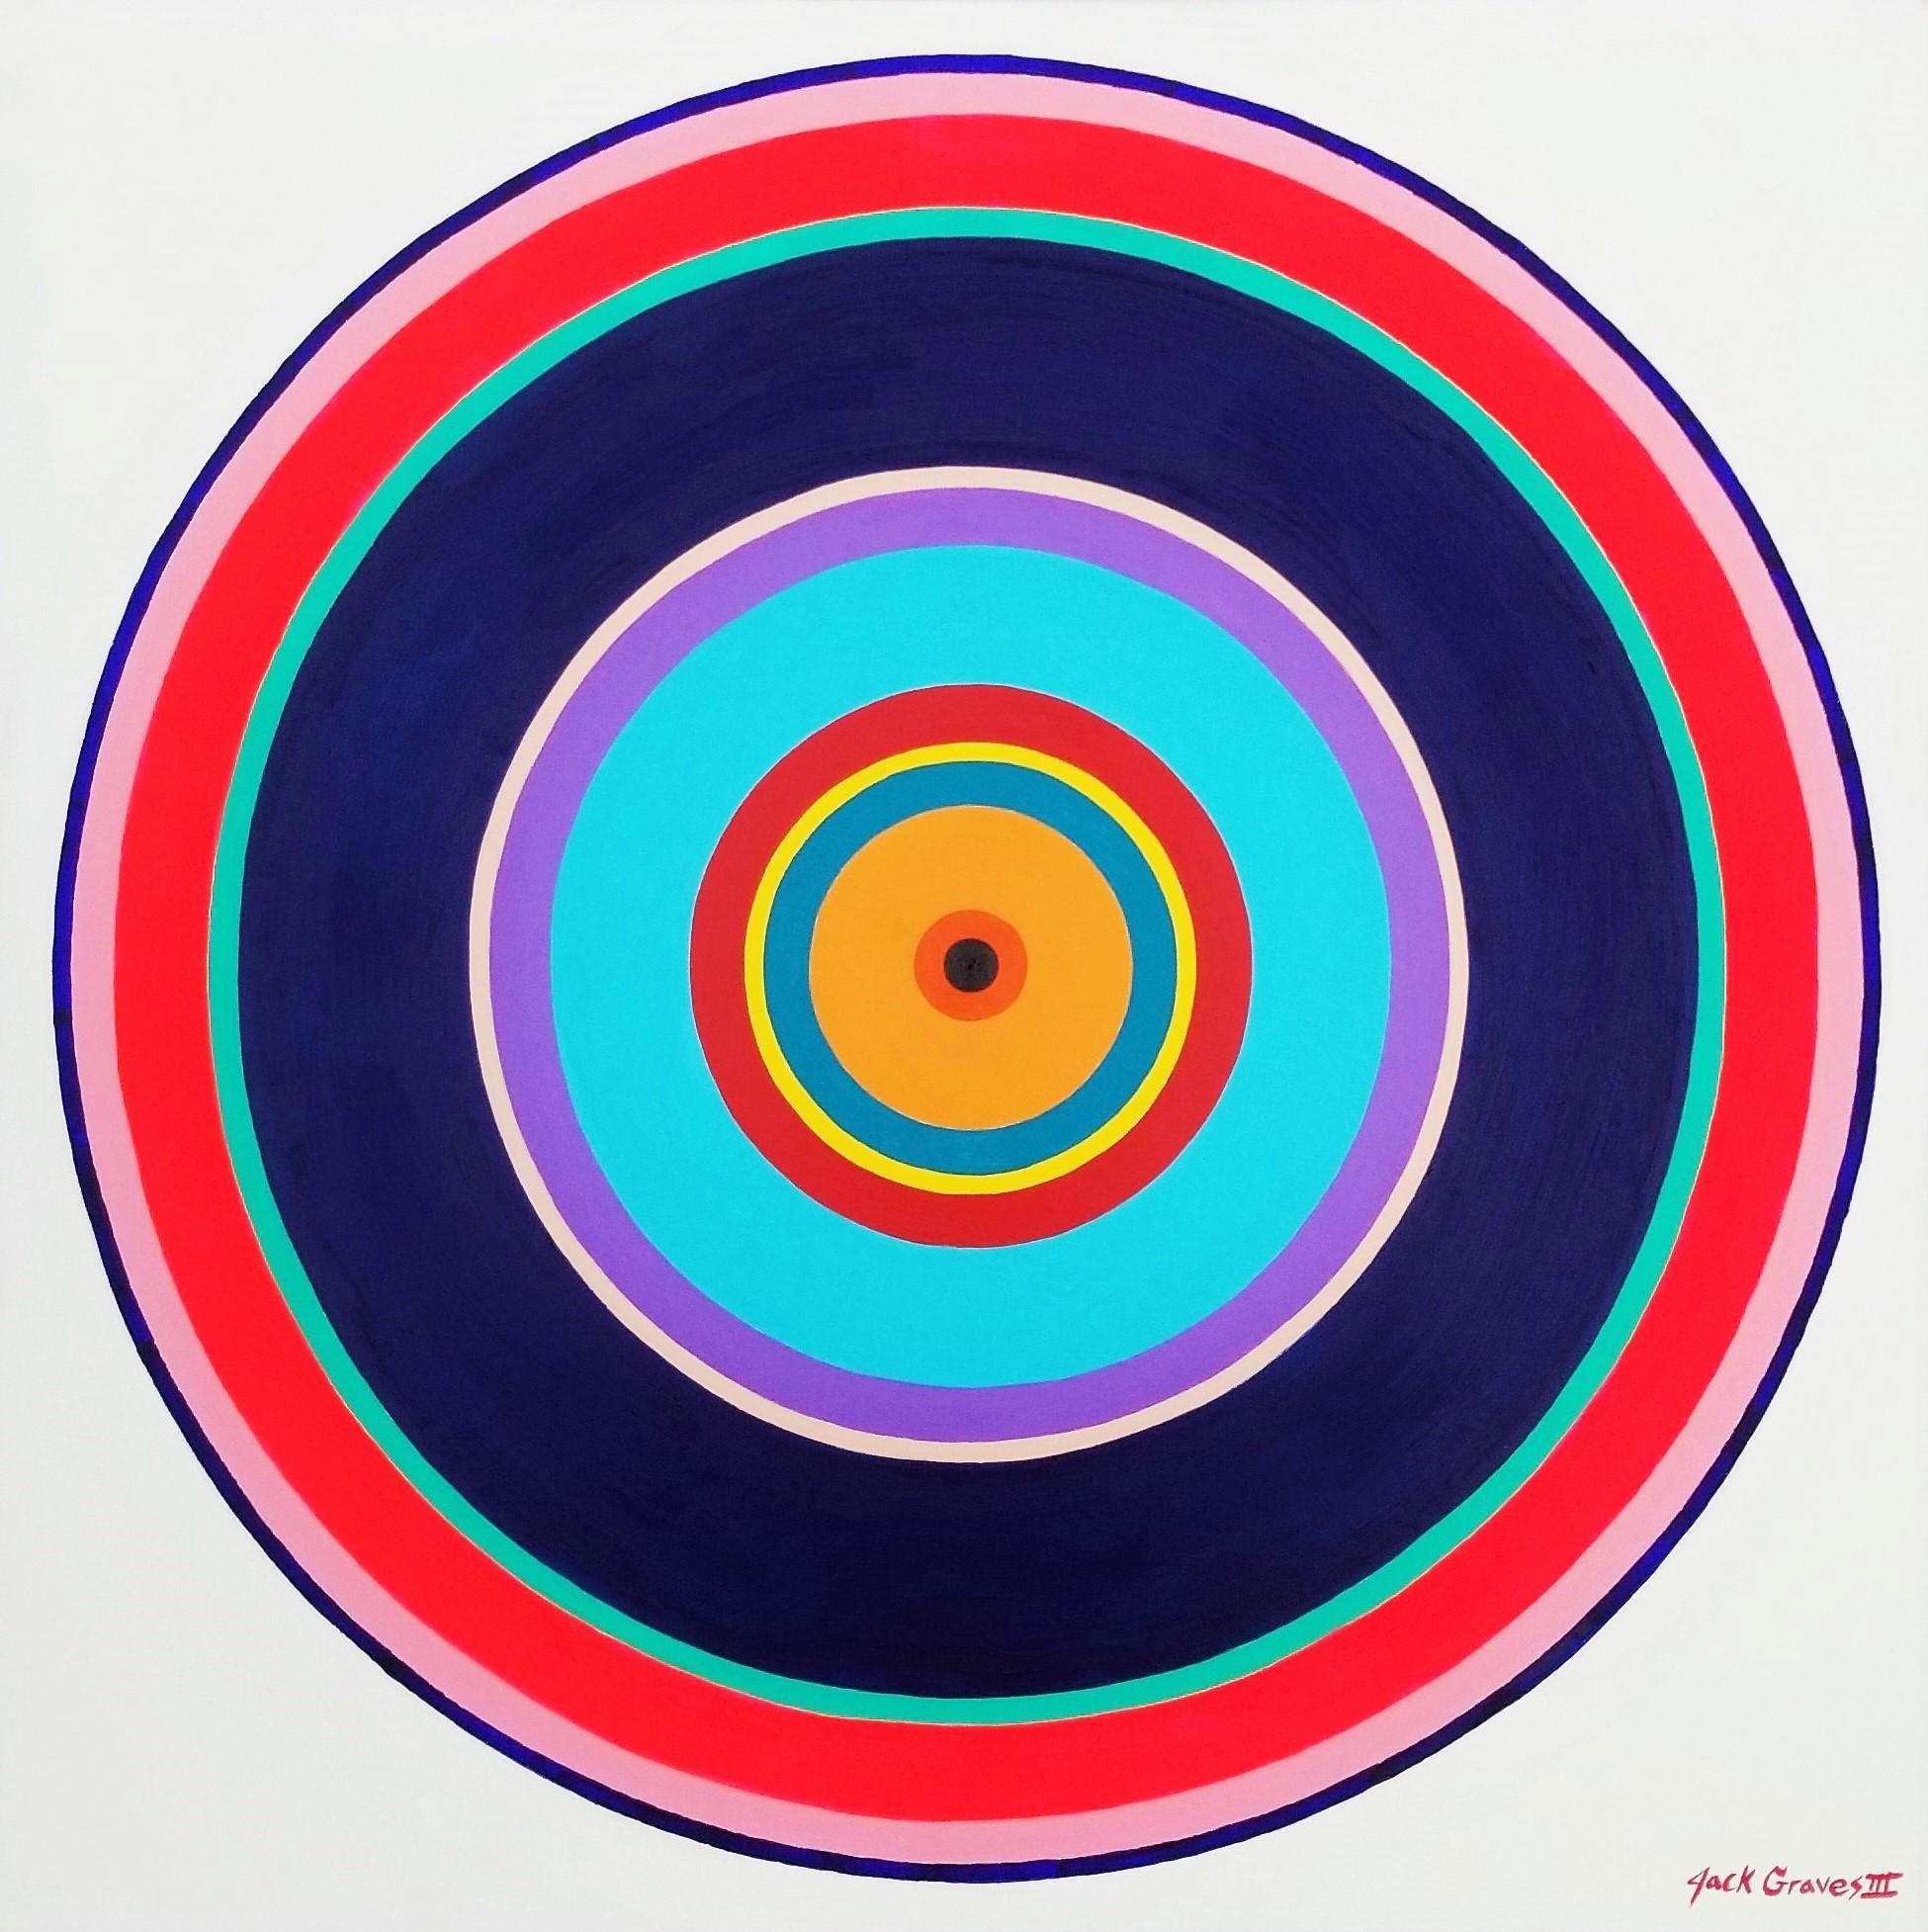 Abstract Painting Jack Graves III - Aura V /// Contemporary Abstract Geometric Circles Colorful Art Striped Minimal